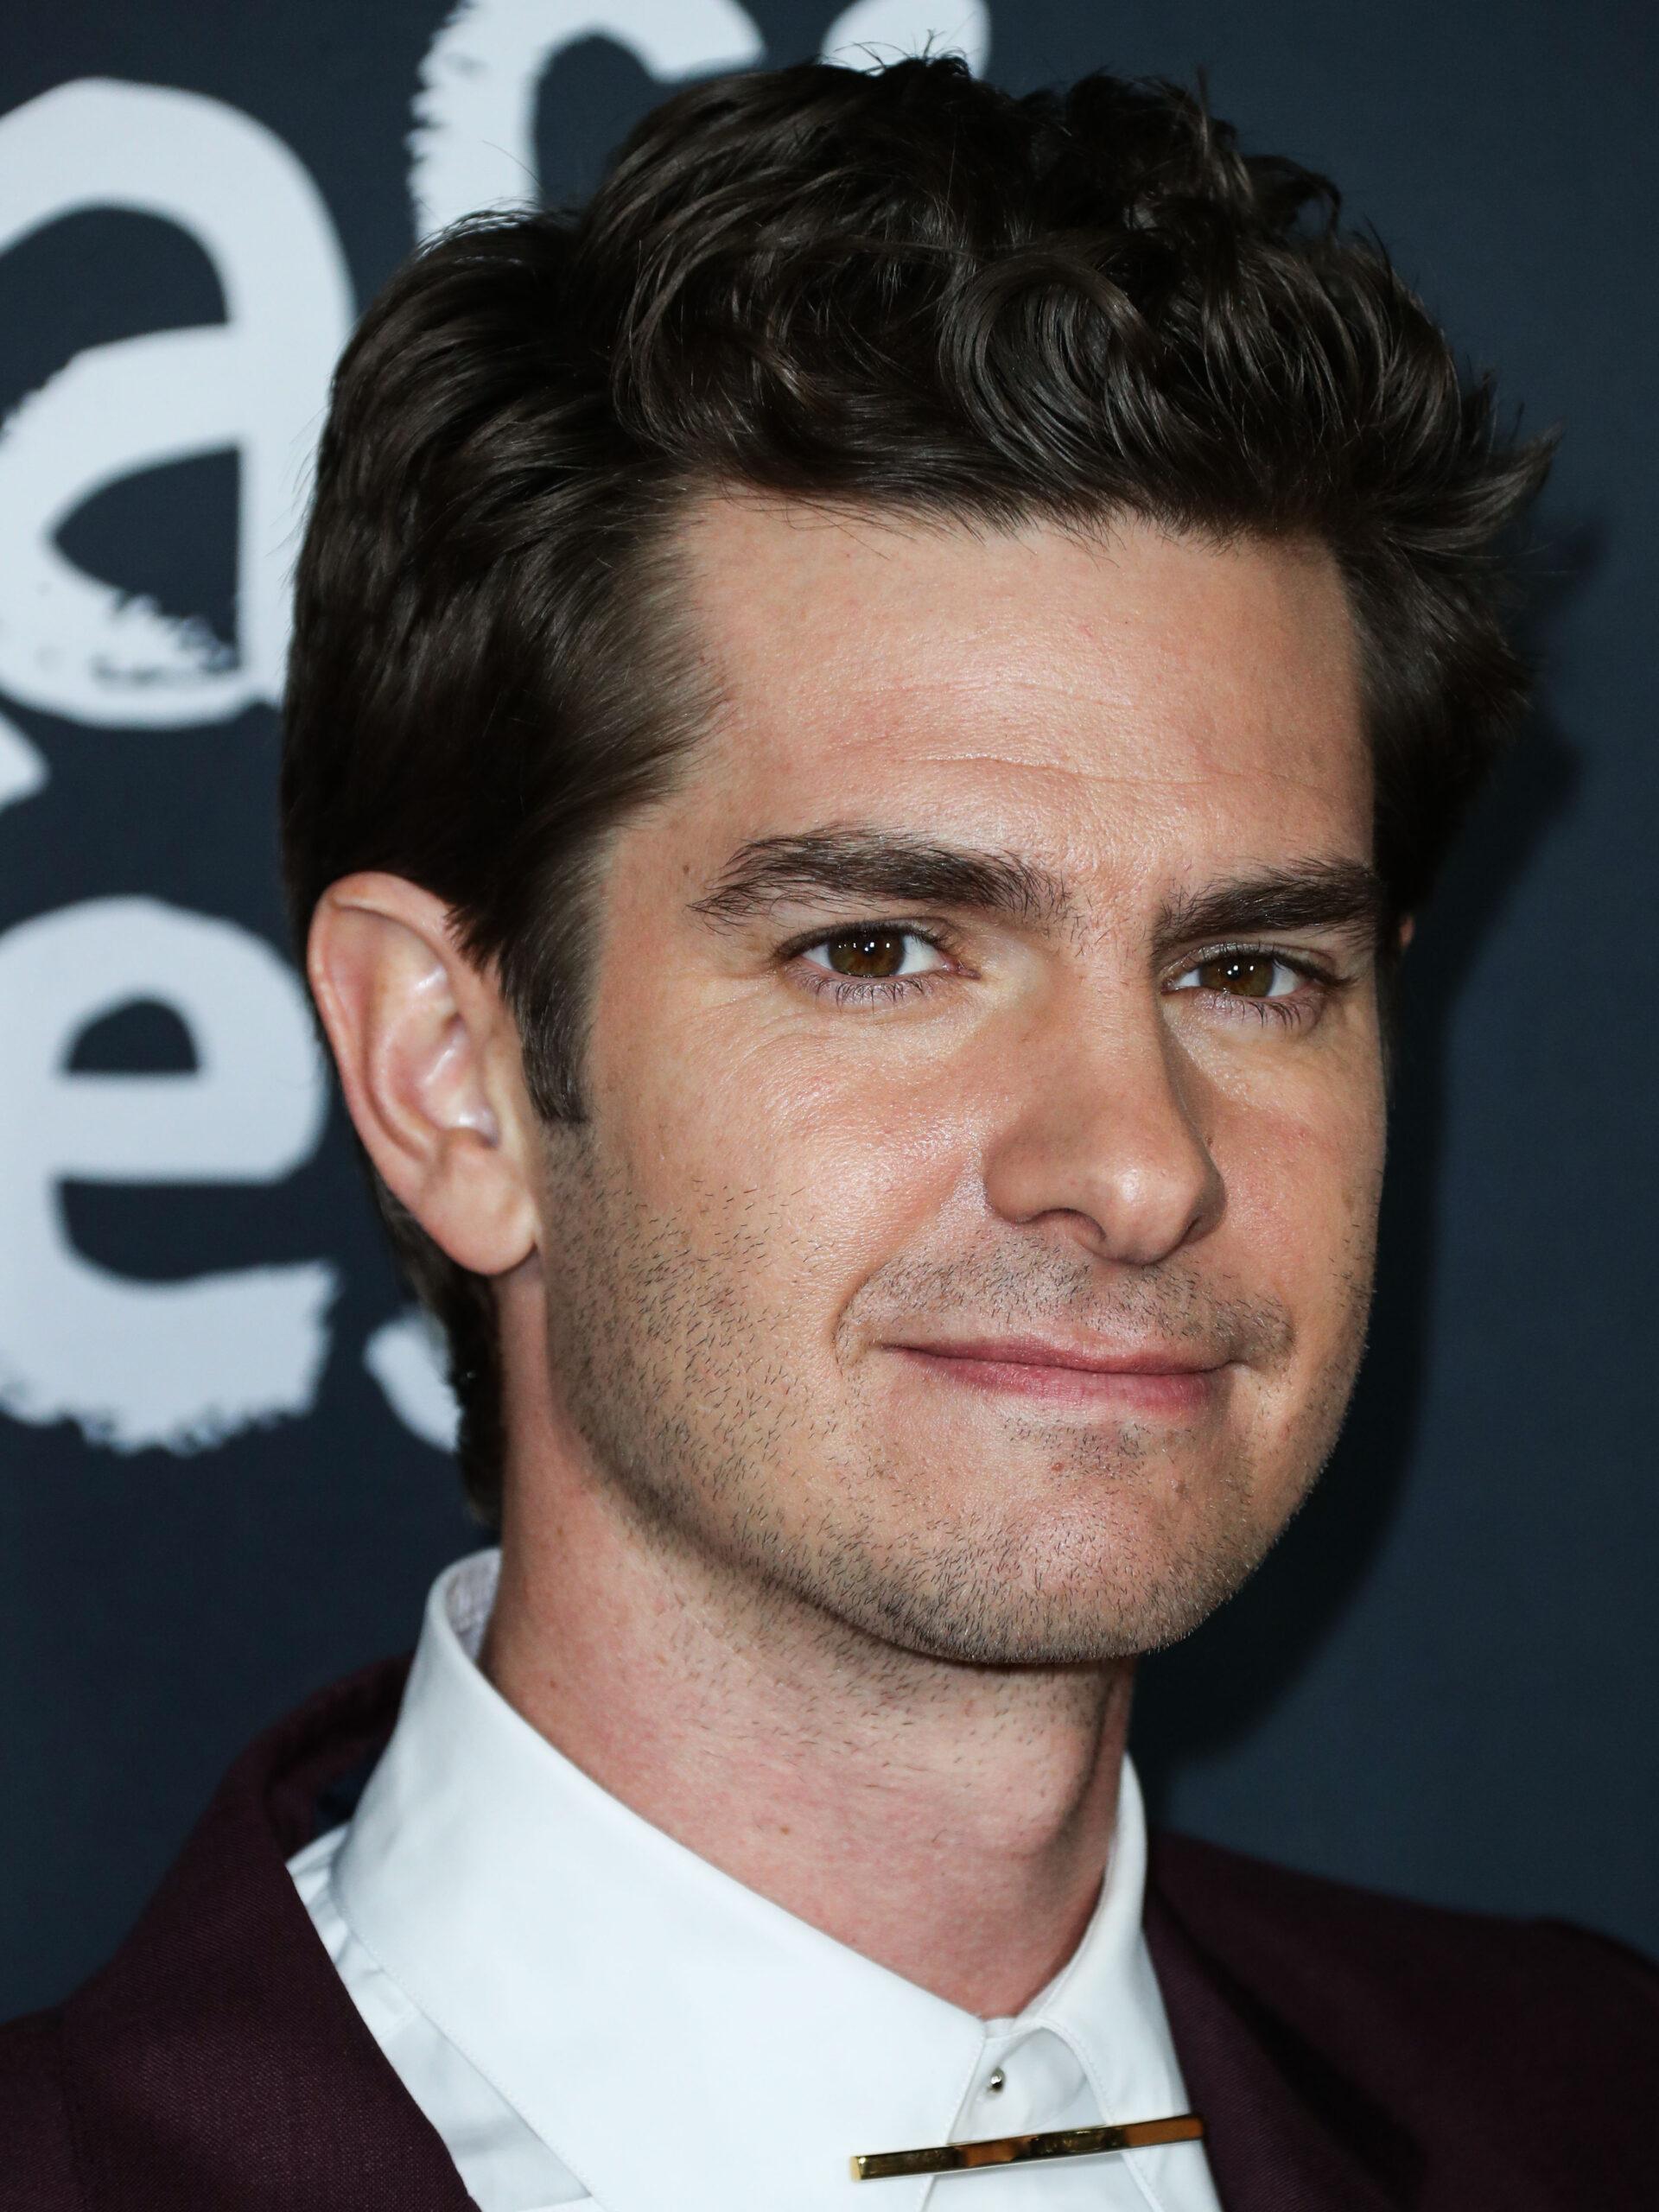 Andrew Garfield at the 2021 AFI Fest - Opening Night Gala Premiere Of Netflix's 'tick, tick...BOOM!'